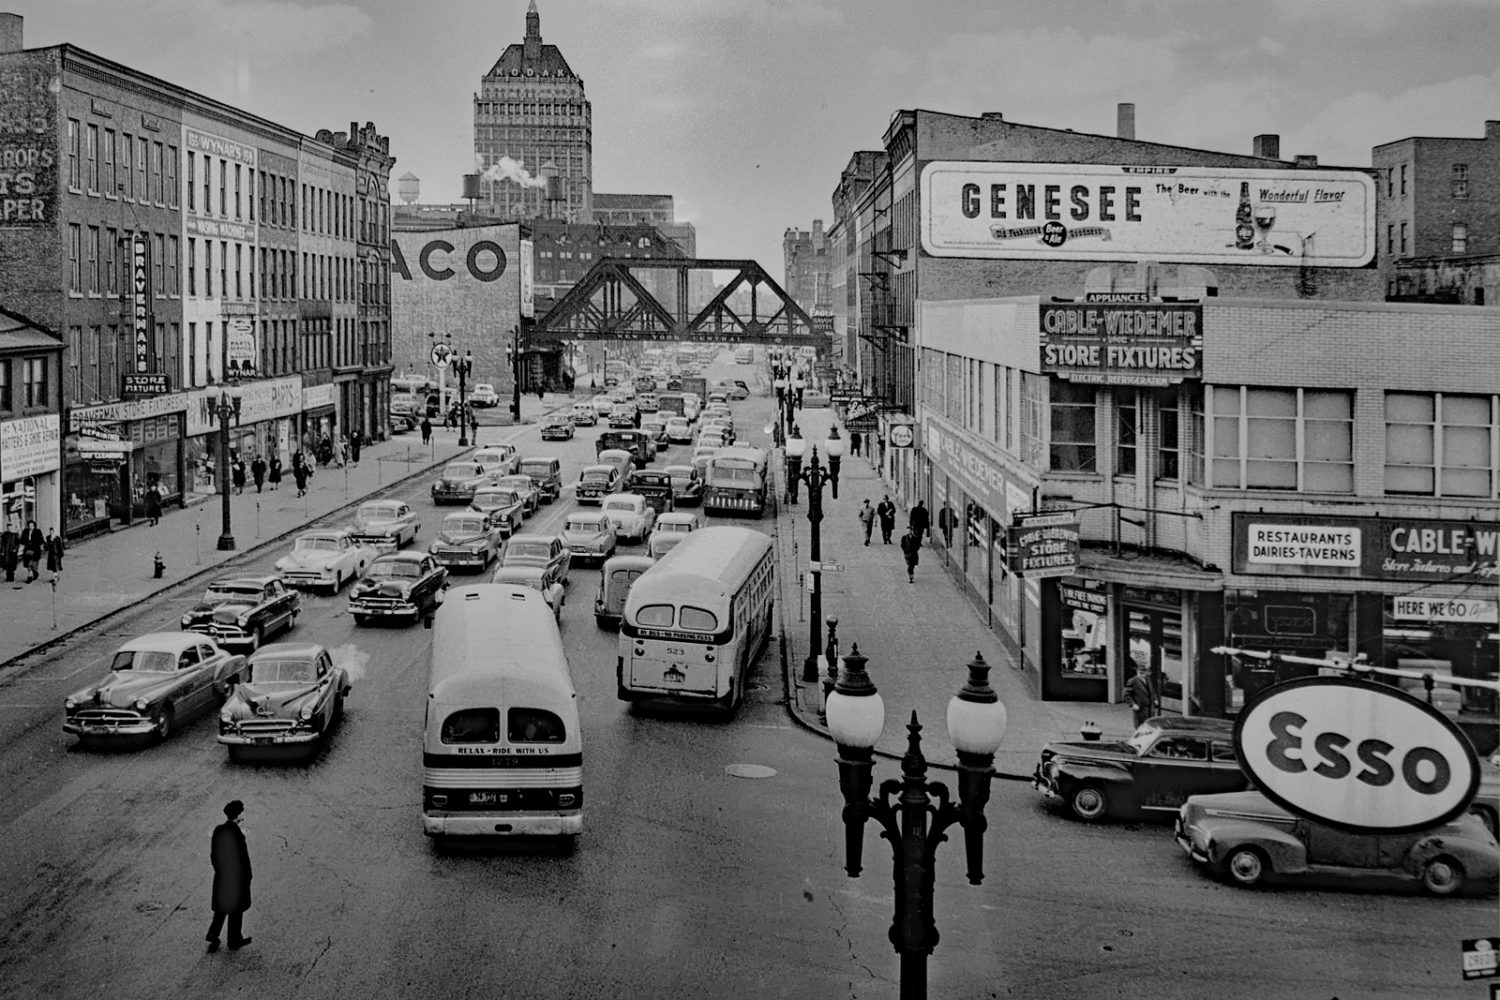 State Street in Rochester, New York 1952 - photographer unknown